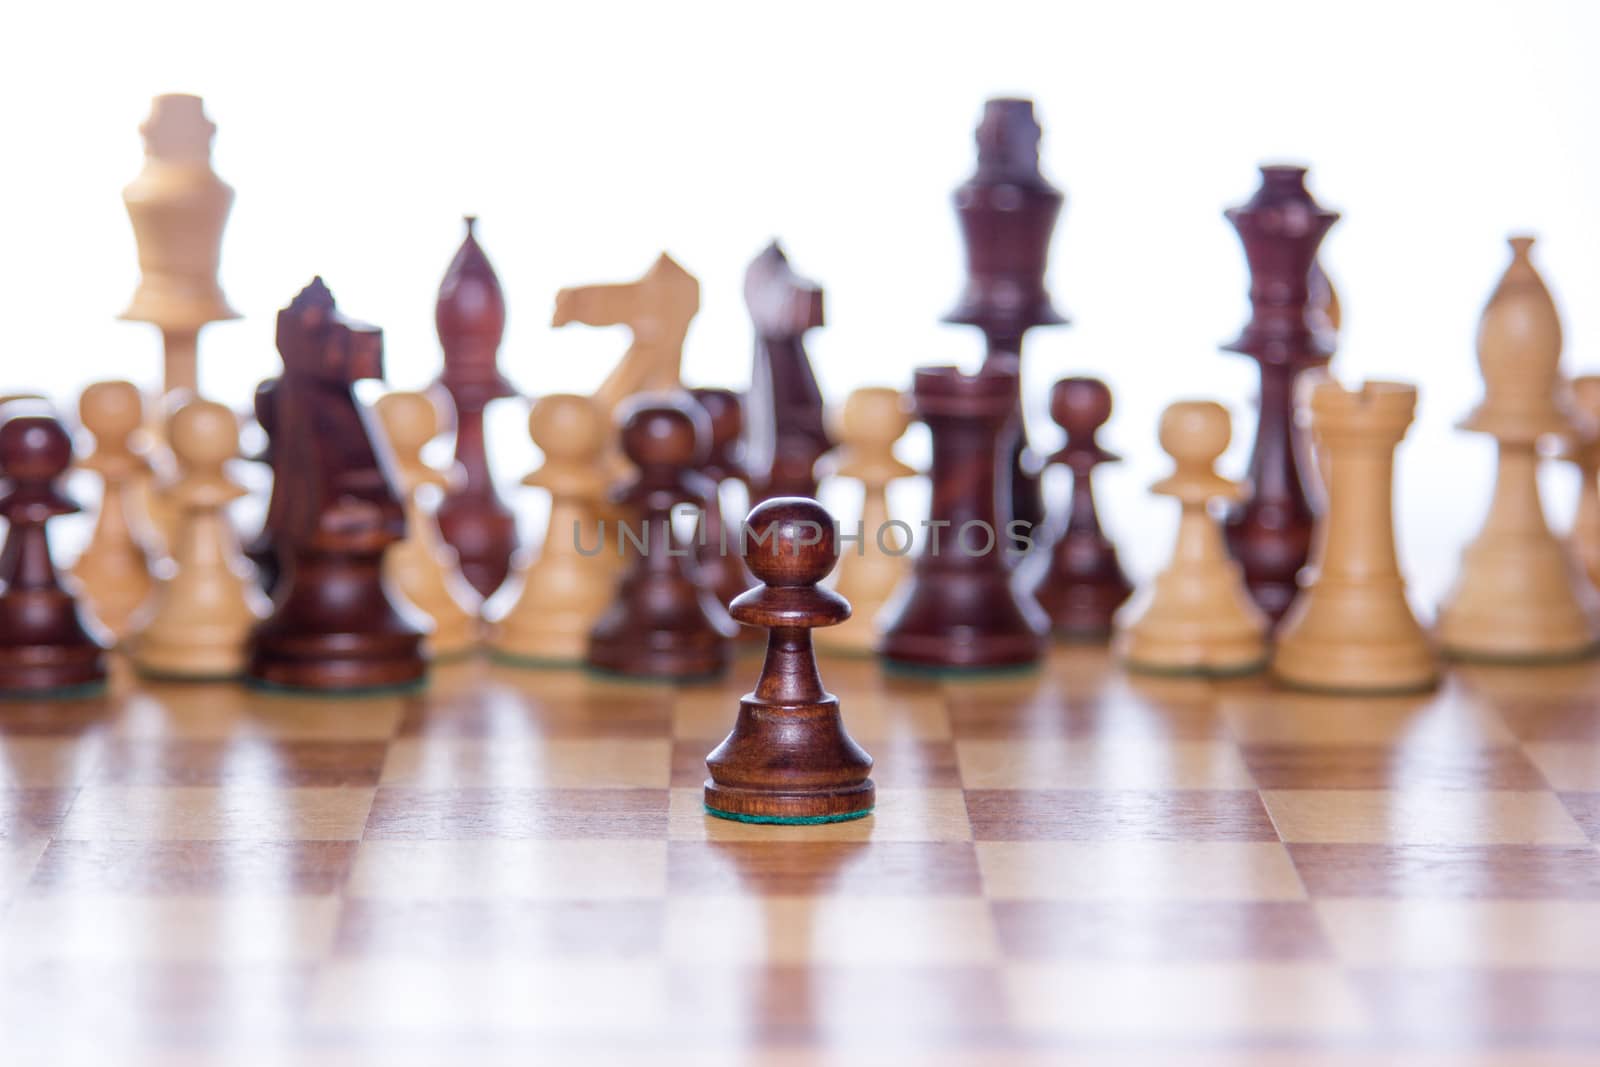 Chessboard with the focus on the pawn standing in the front by Cursedsenses